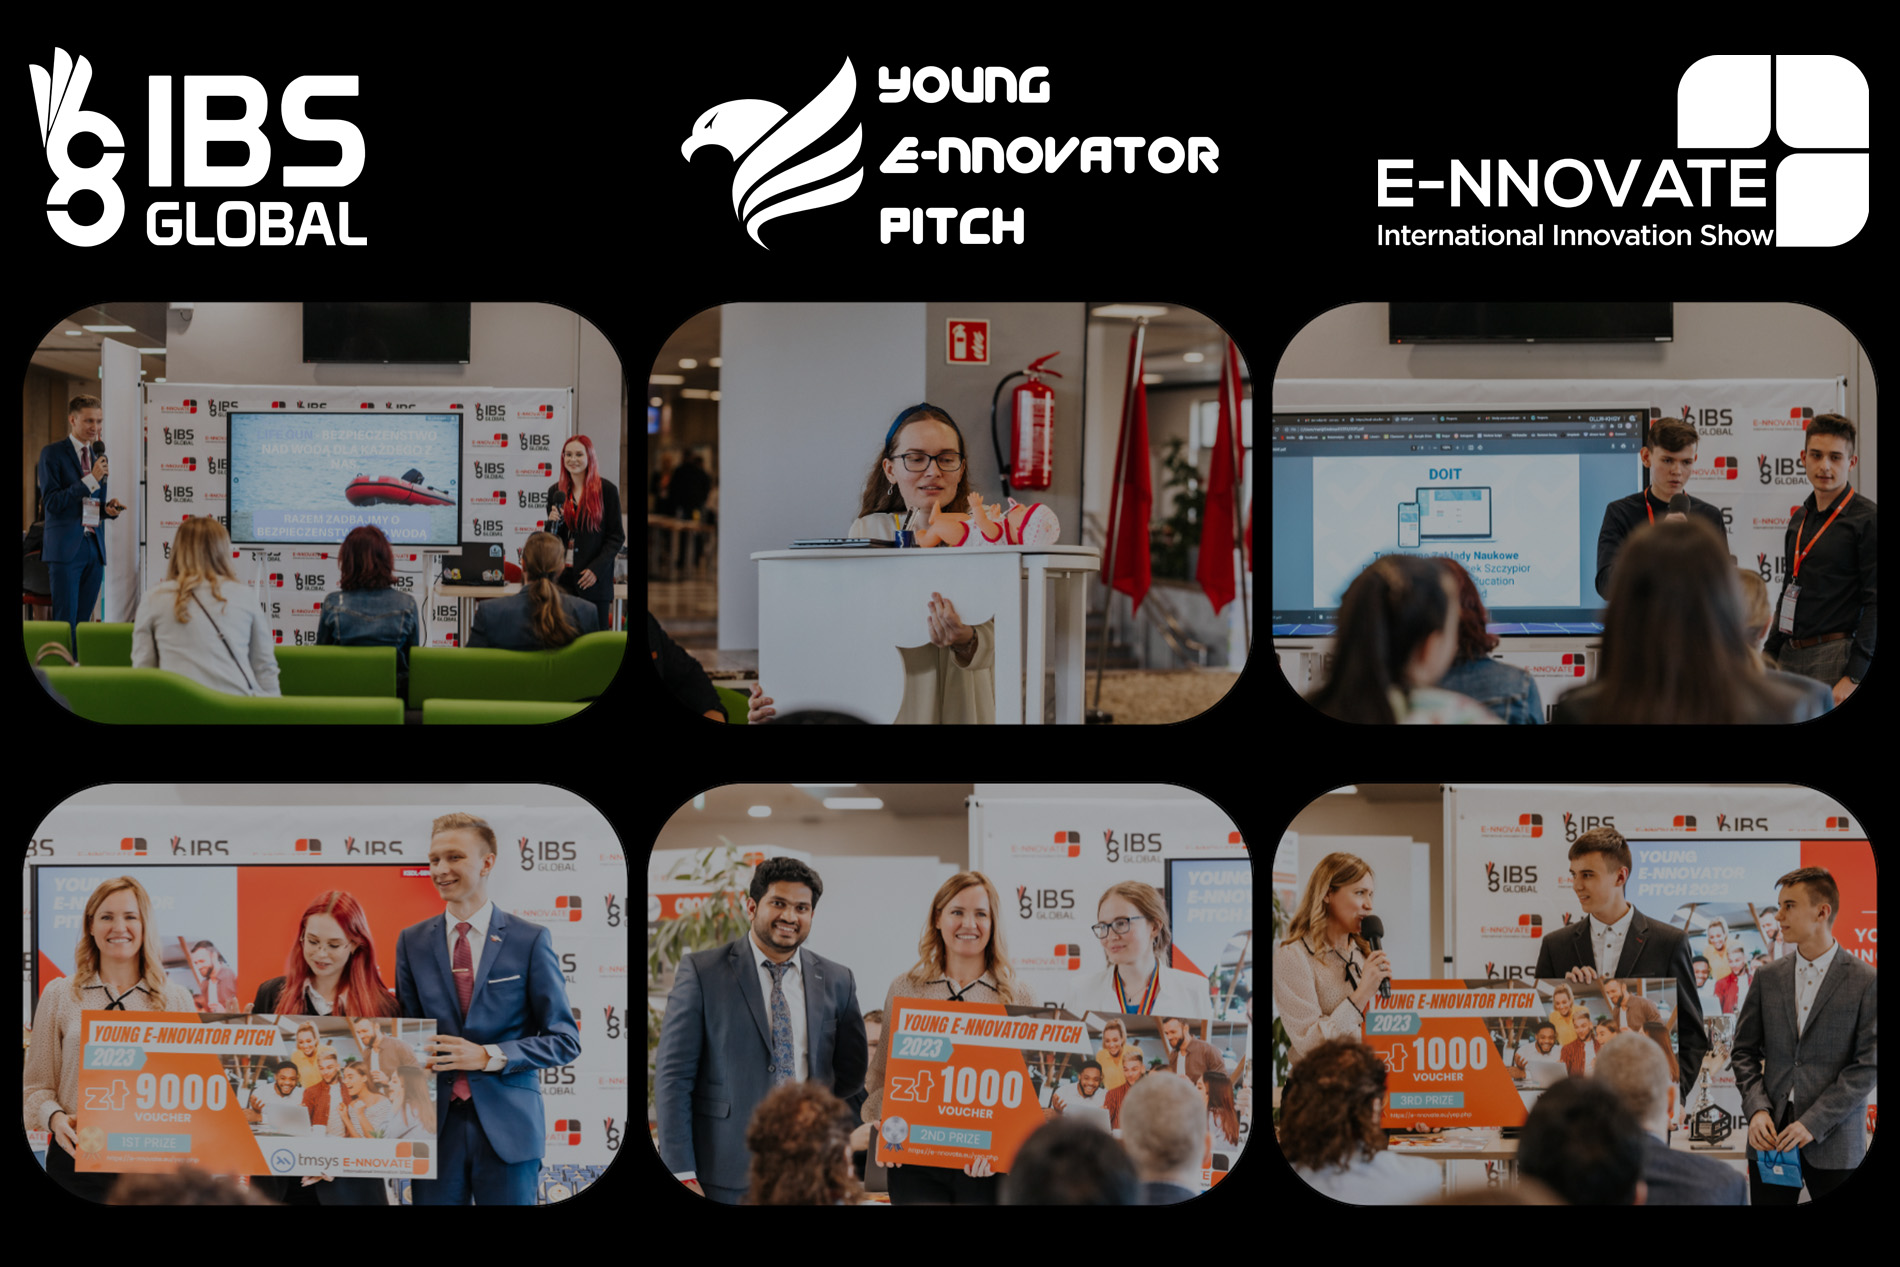 Young E-NNOVATOR Pitch Promo video